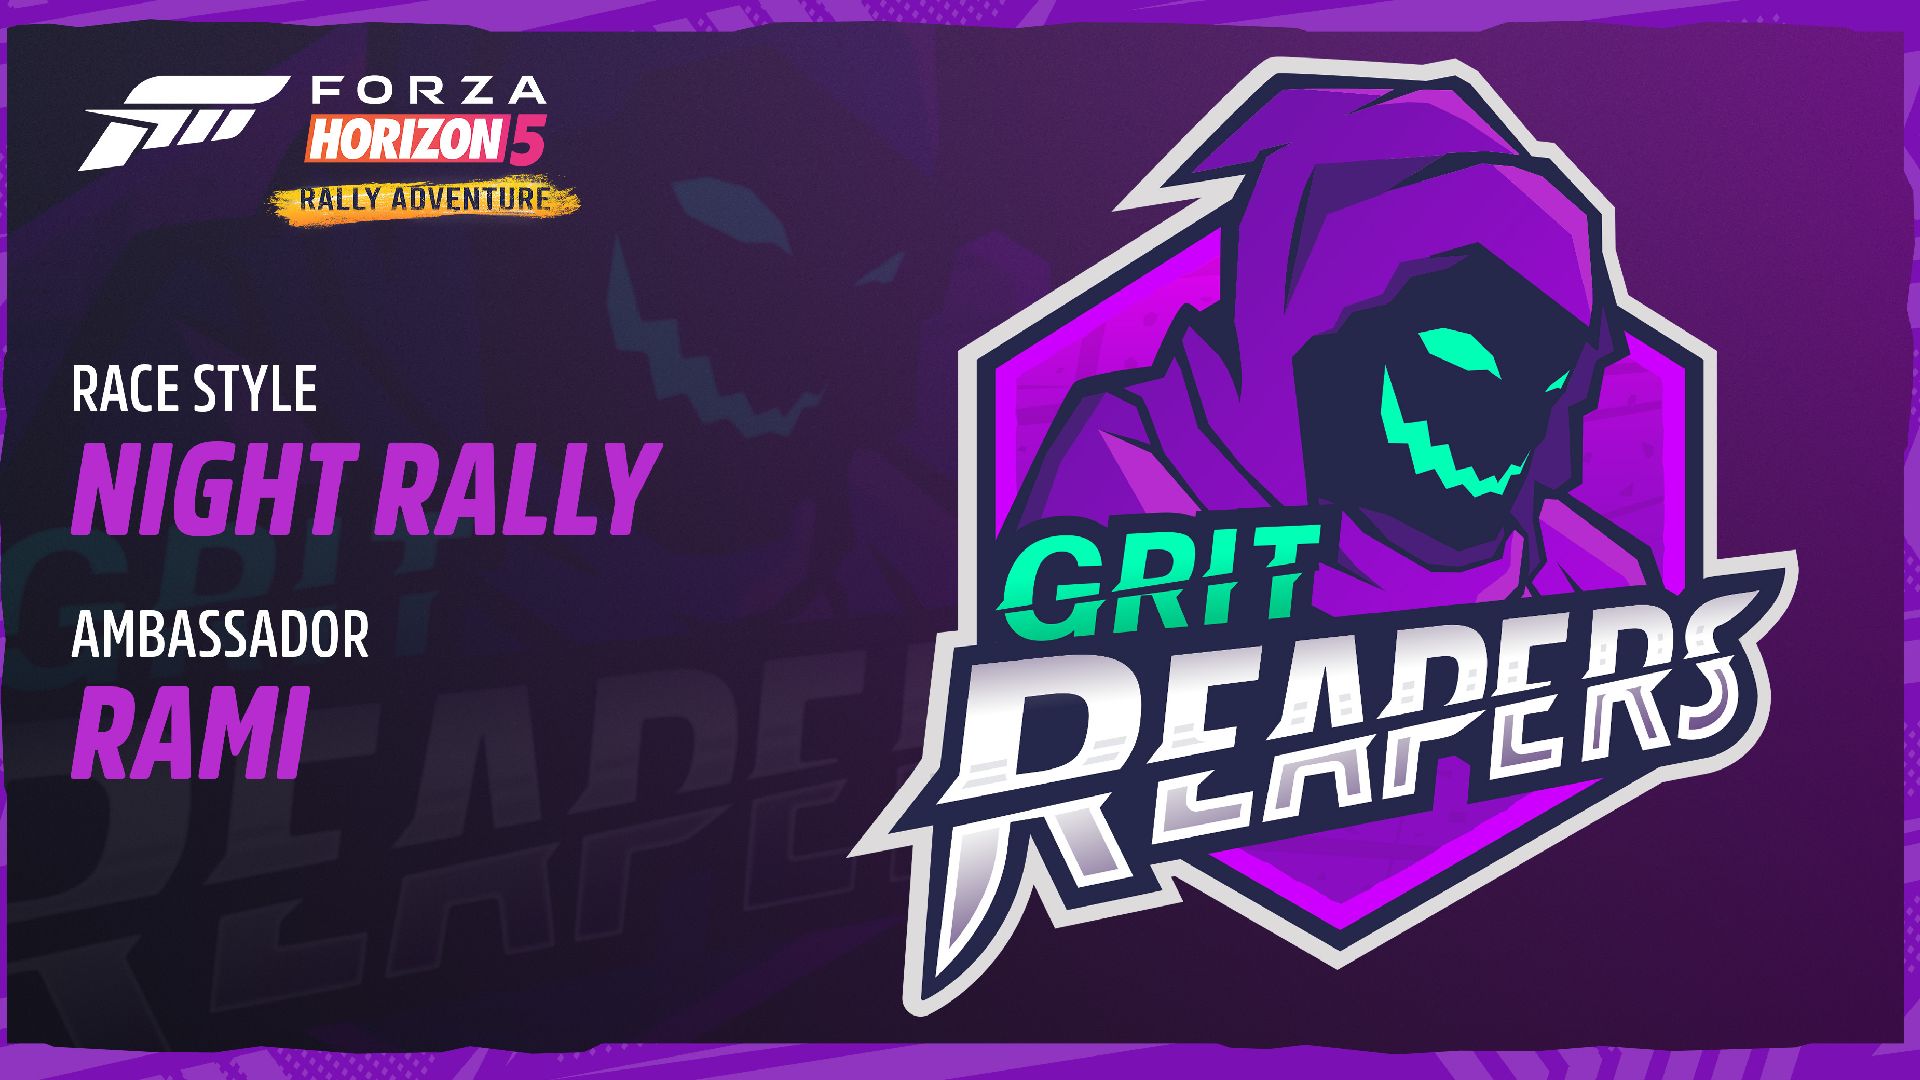 Forza Horizo​​n 5 Rally Adventure Teams: The Grit Reapers のロゴが見える